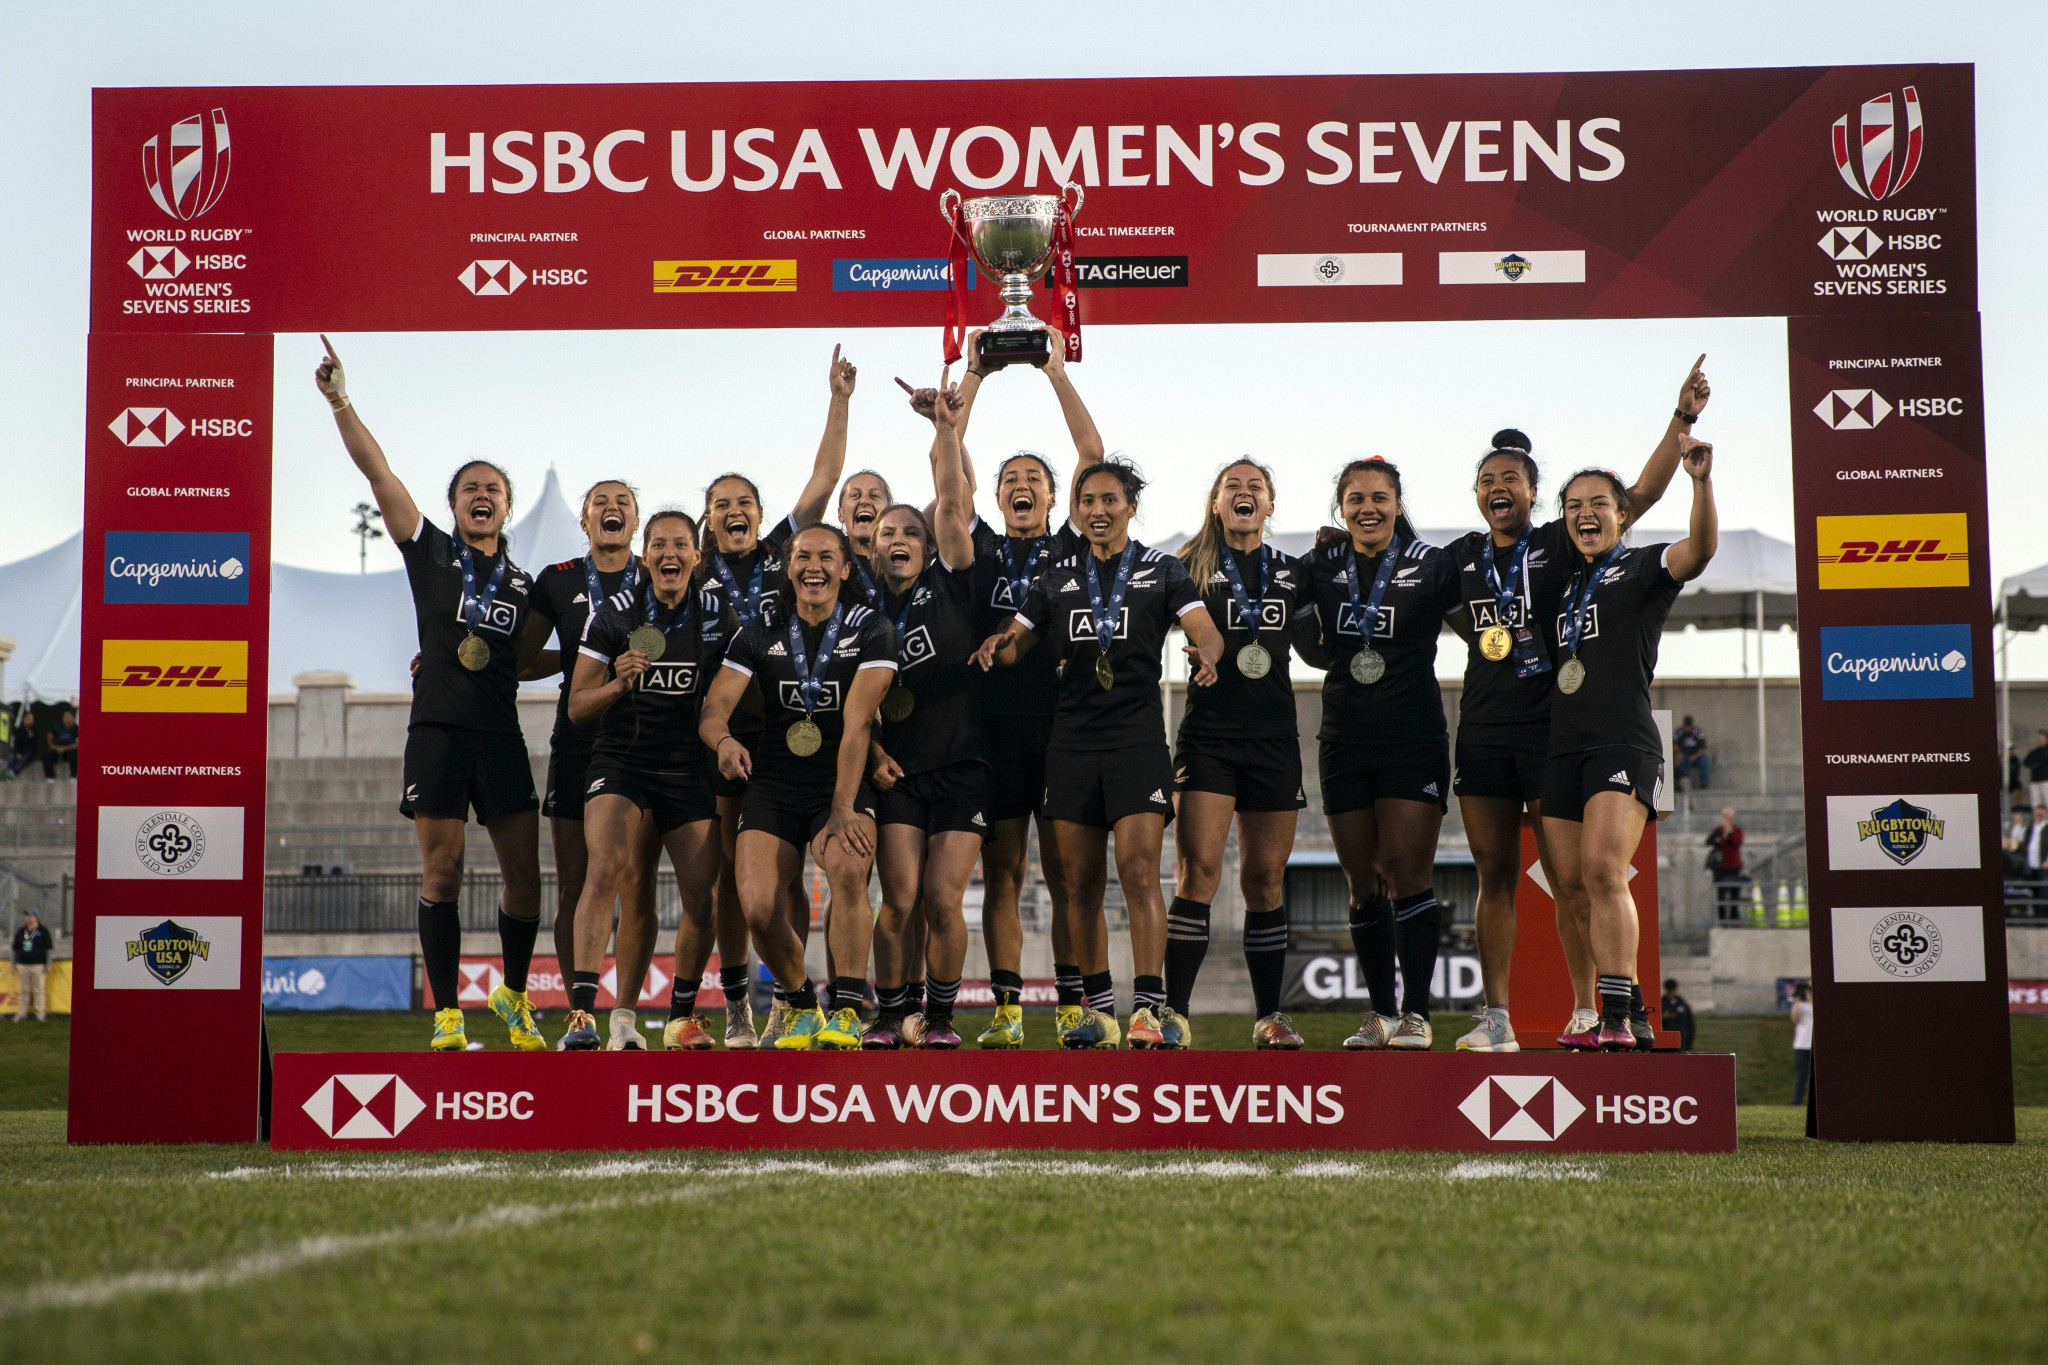 New Zealand celebrate winning the opening event of the 2018-2019 World Rugby Women's Sevens Series after beating the hosts United States in Denver ©Getty Images